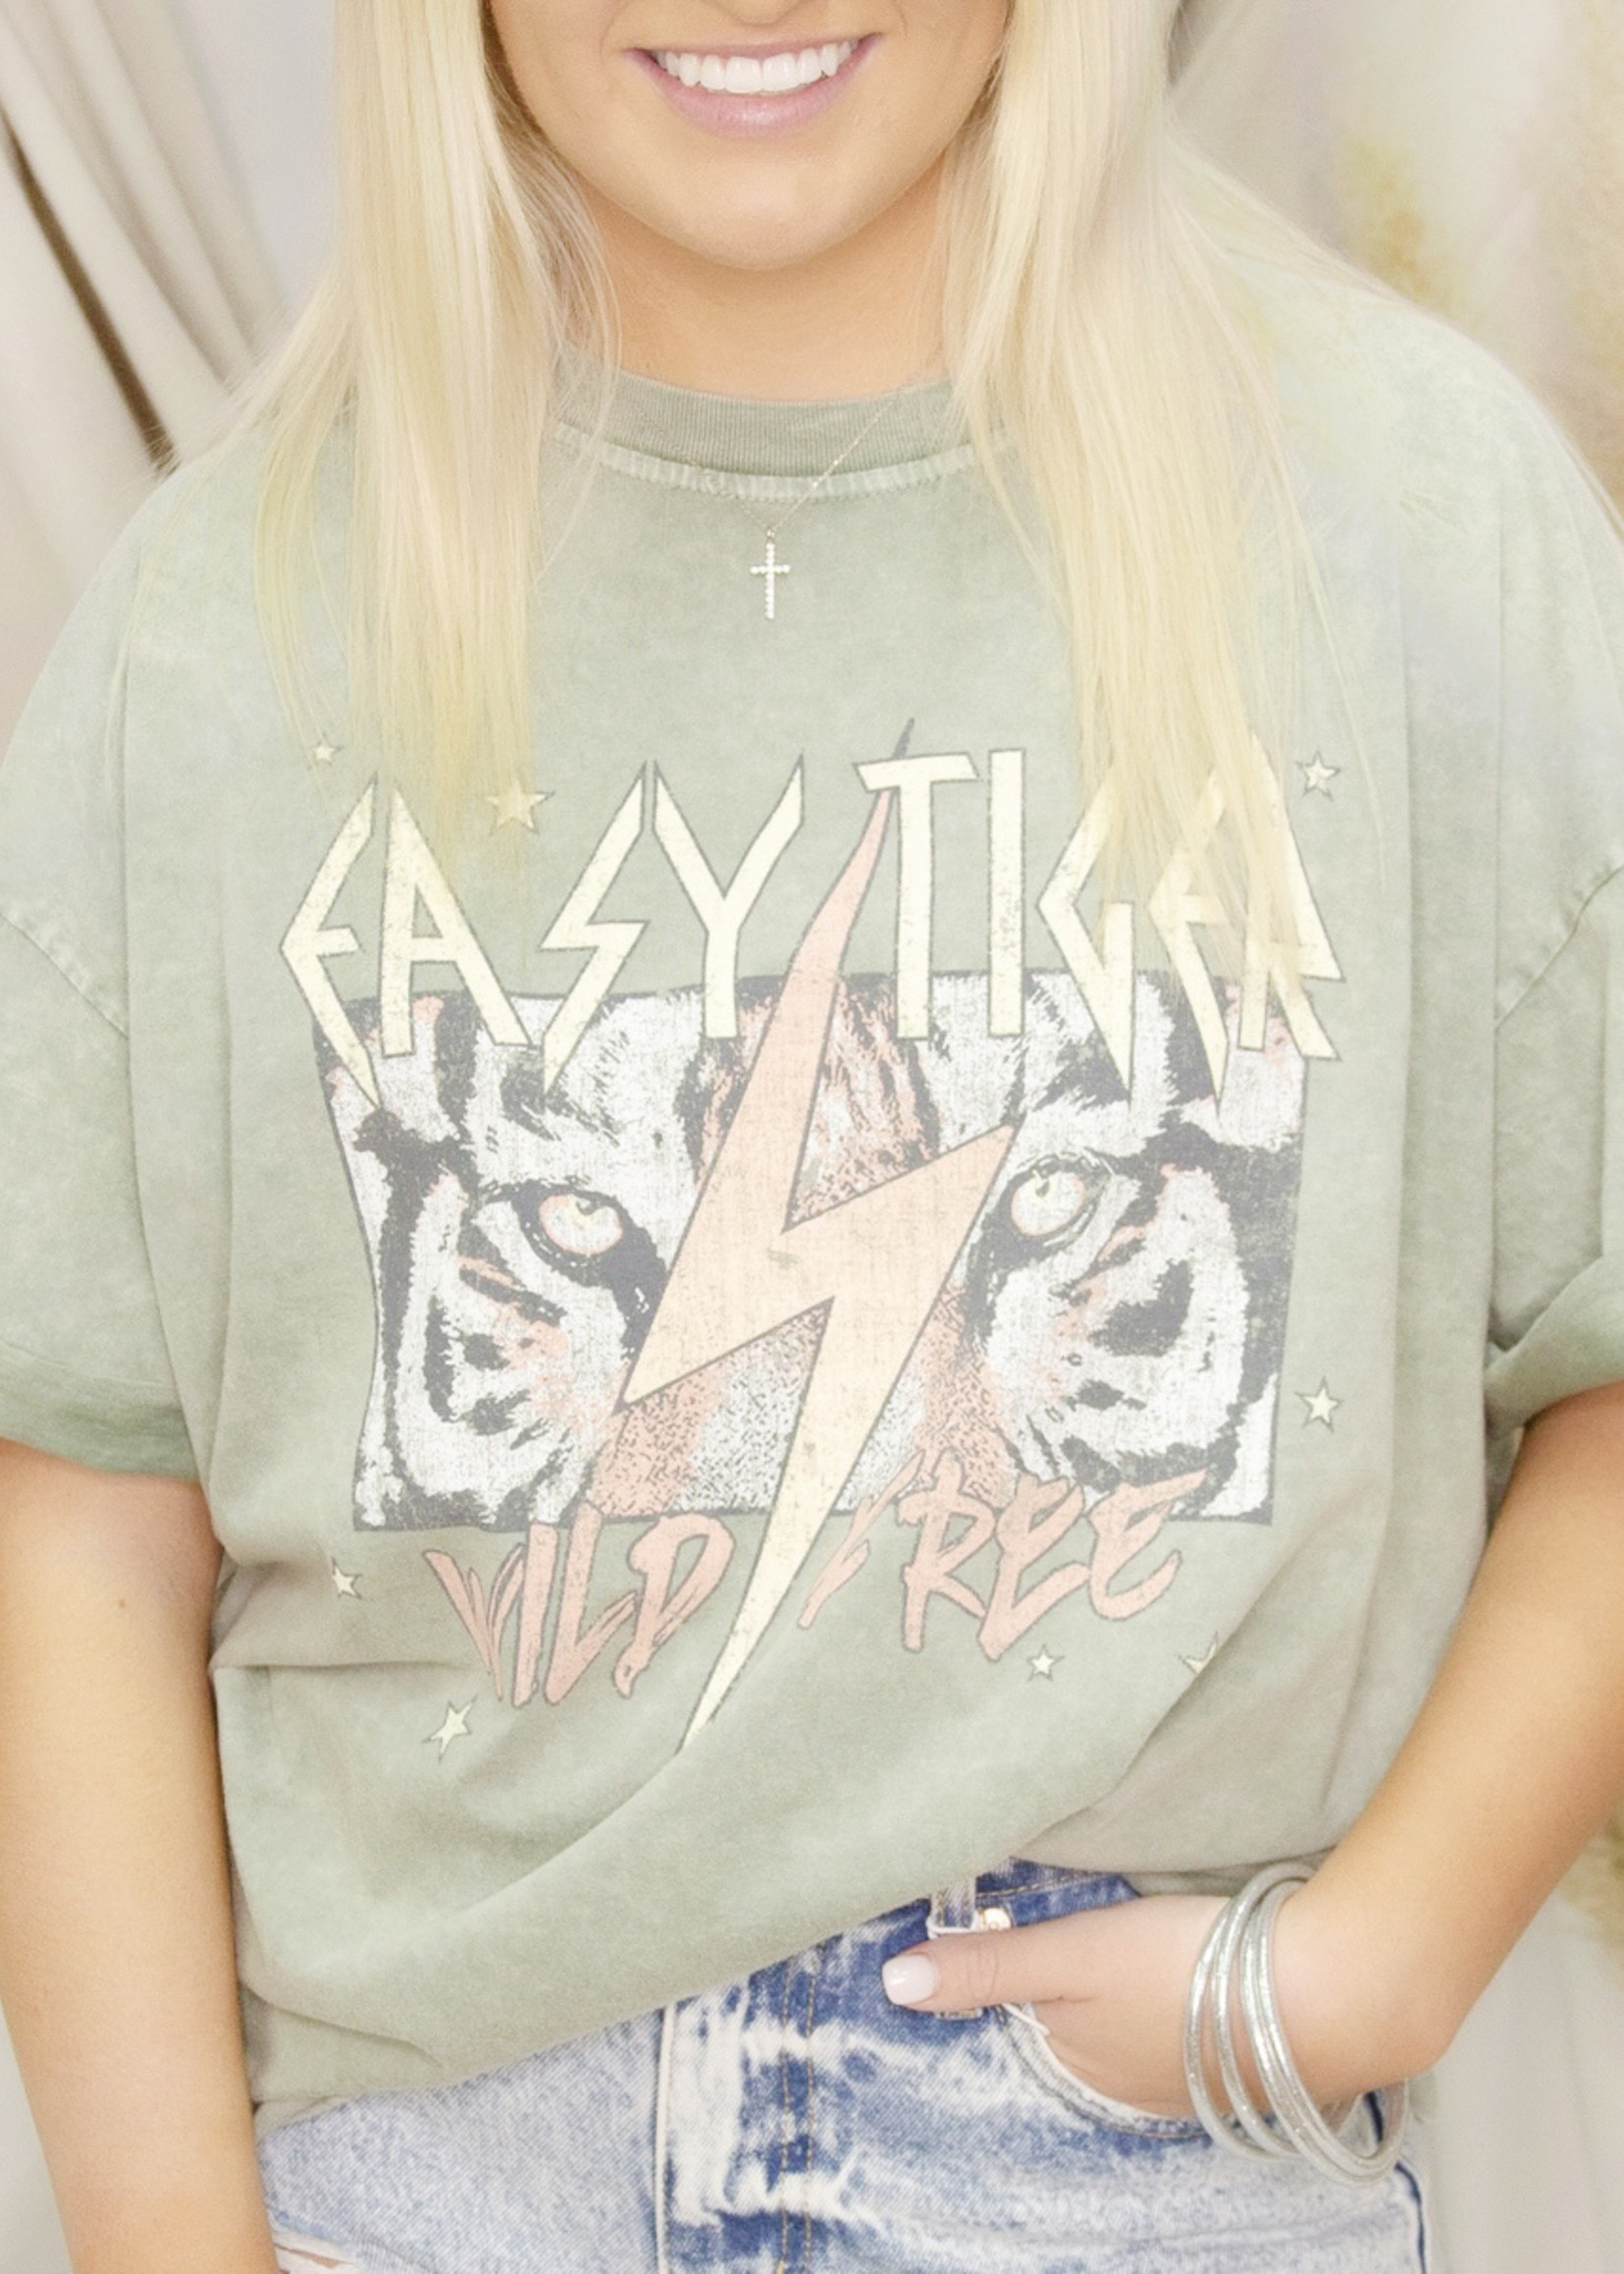 Easy Tiger Wild and Free Tee